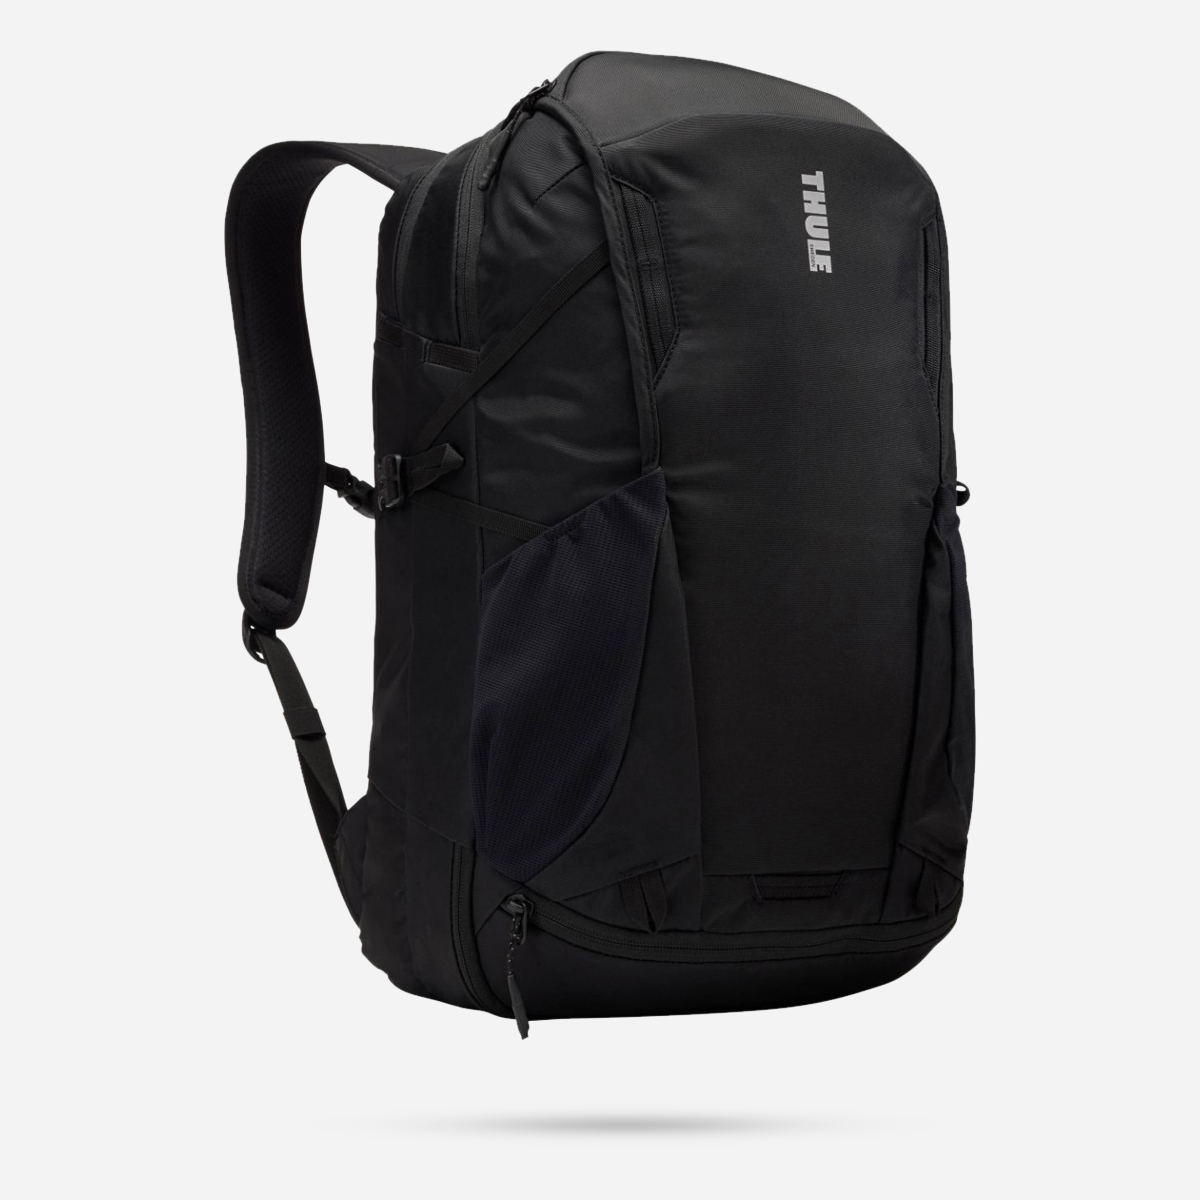 AN292353 EnRoute Backpack 30L